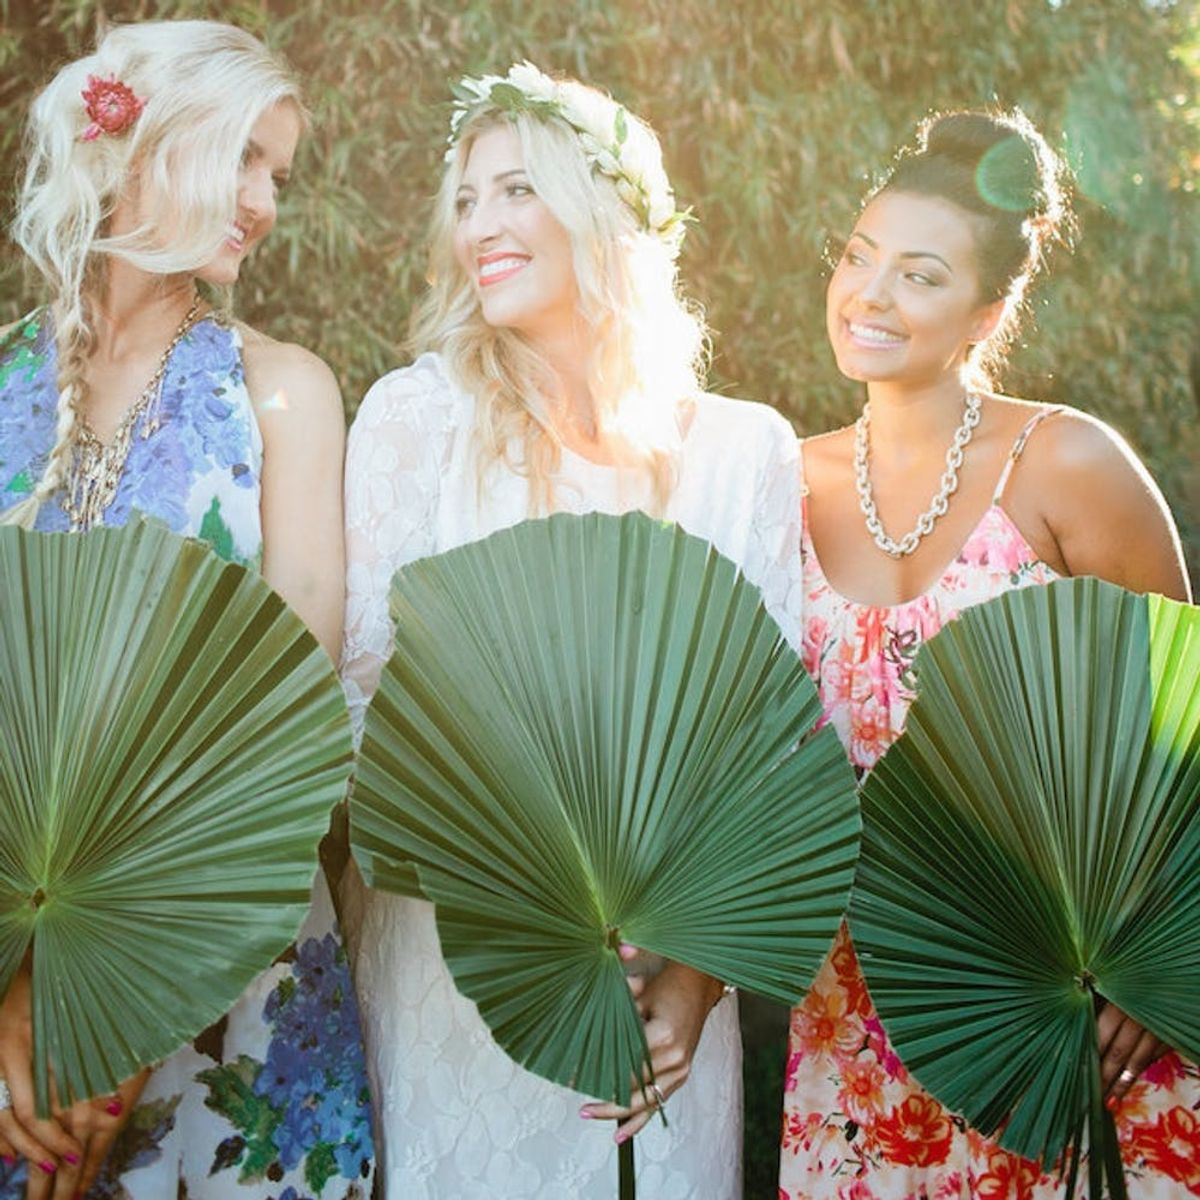 This Aloha-Themed Bridal Shower Is All Kinds of Tropical Chic